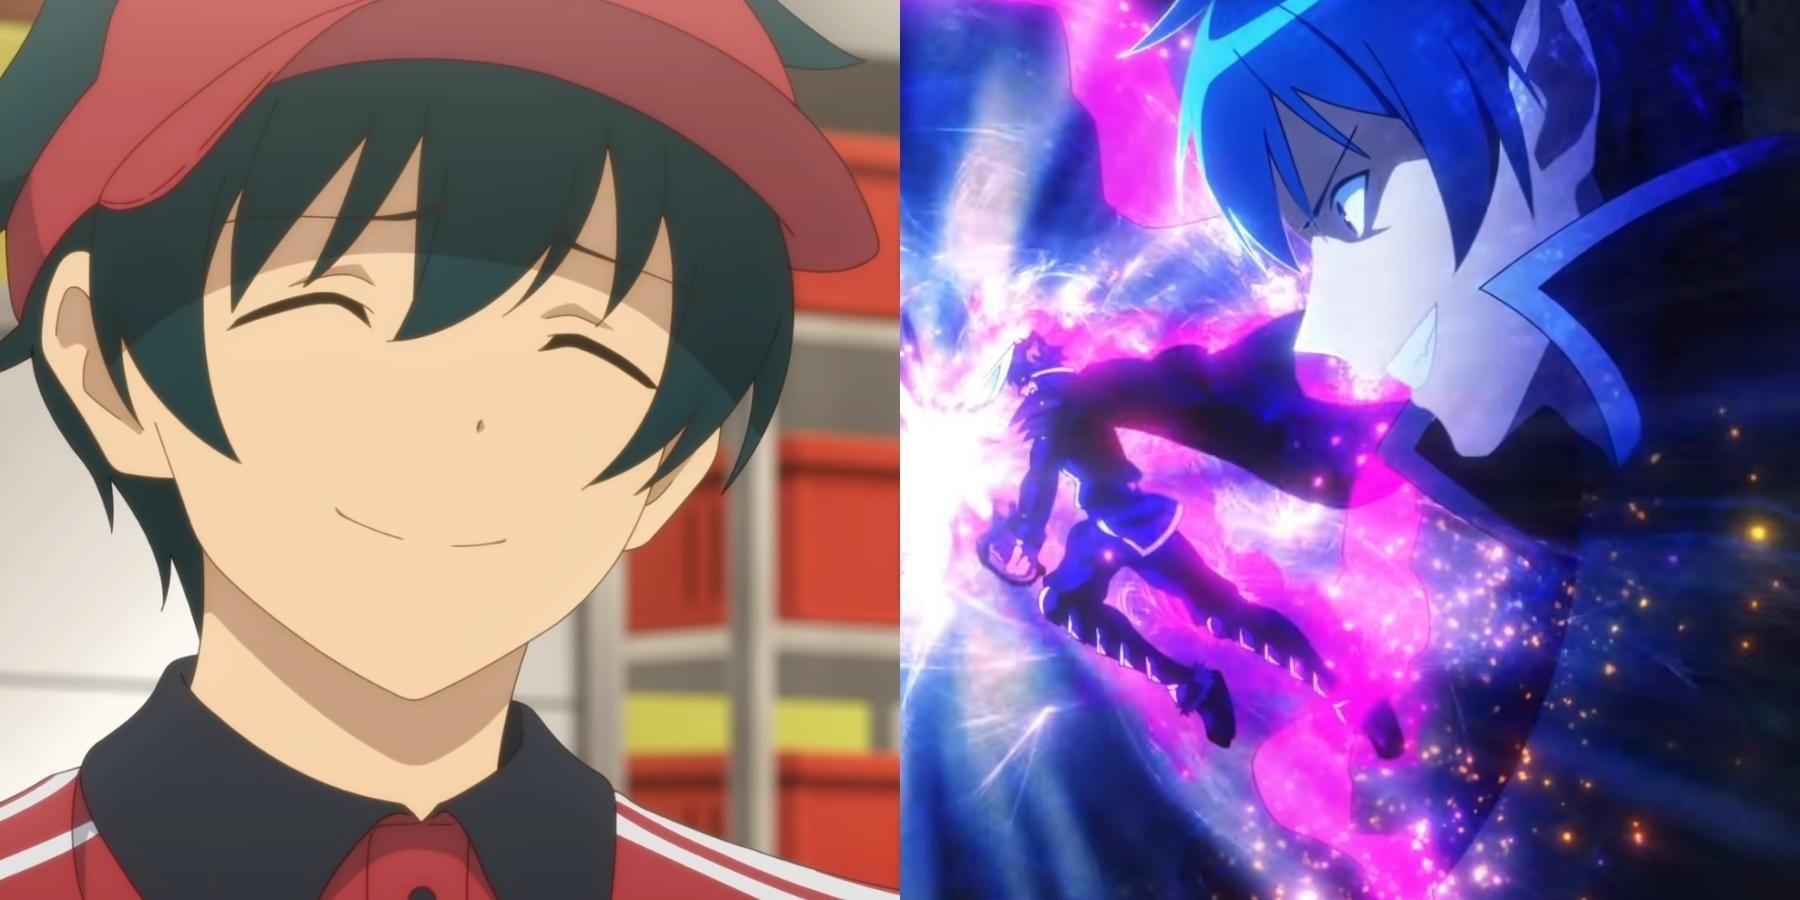 FEATURE: 5 Things to Know About The Devil is a Part-Timer! Season